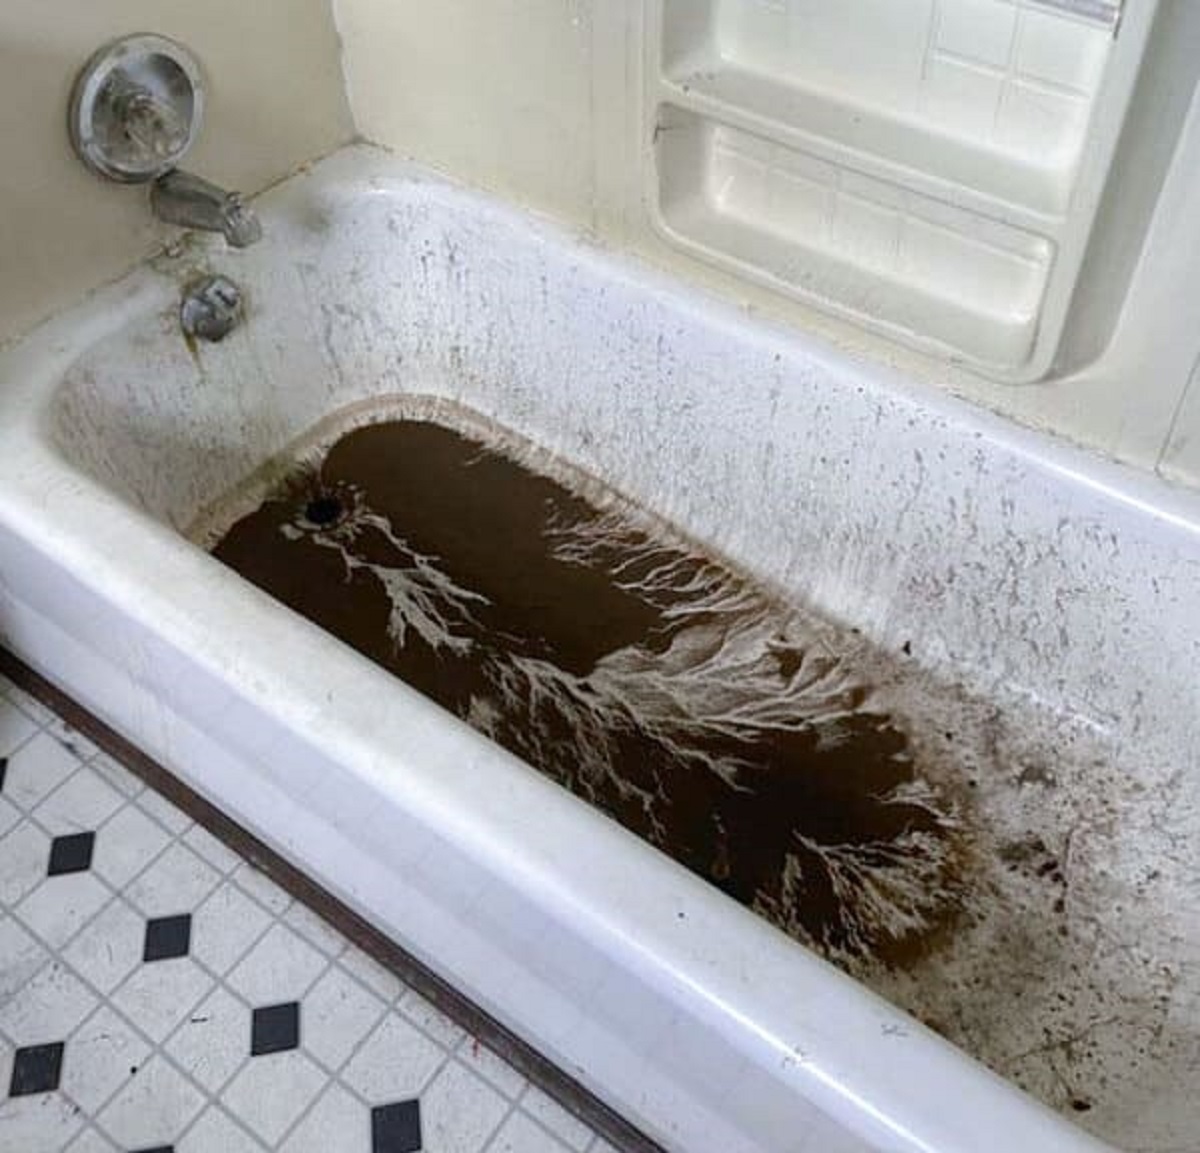 “The Plumber Left My Tub Like This After He Fixed The Sink”